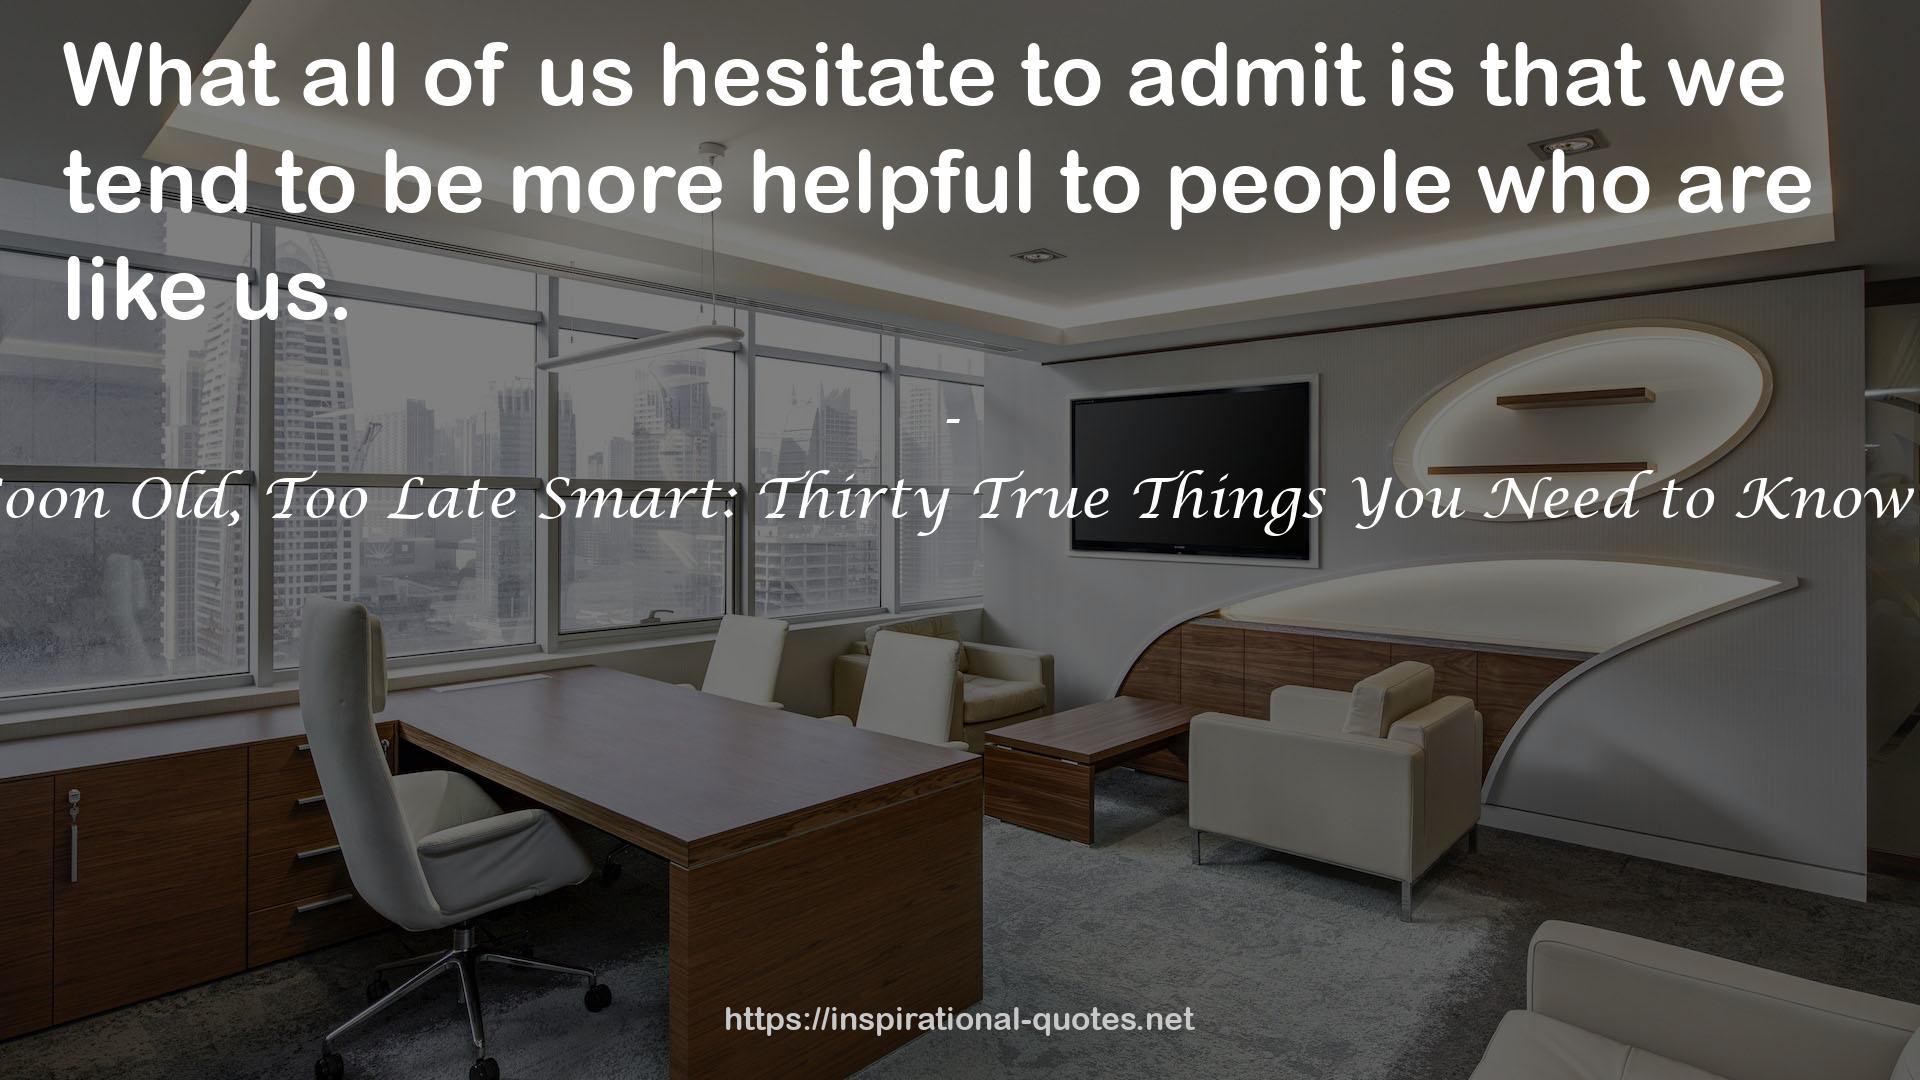 Too Soon Old, Too Late Smart: Thirty True Things You Need to Know Now QUOTES